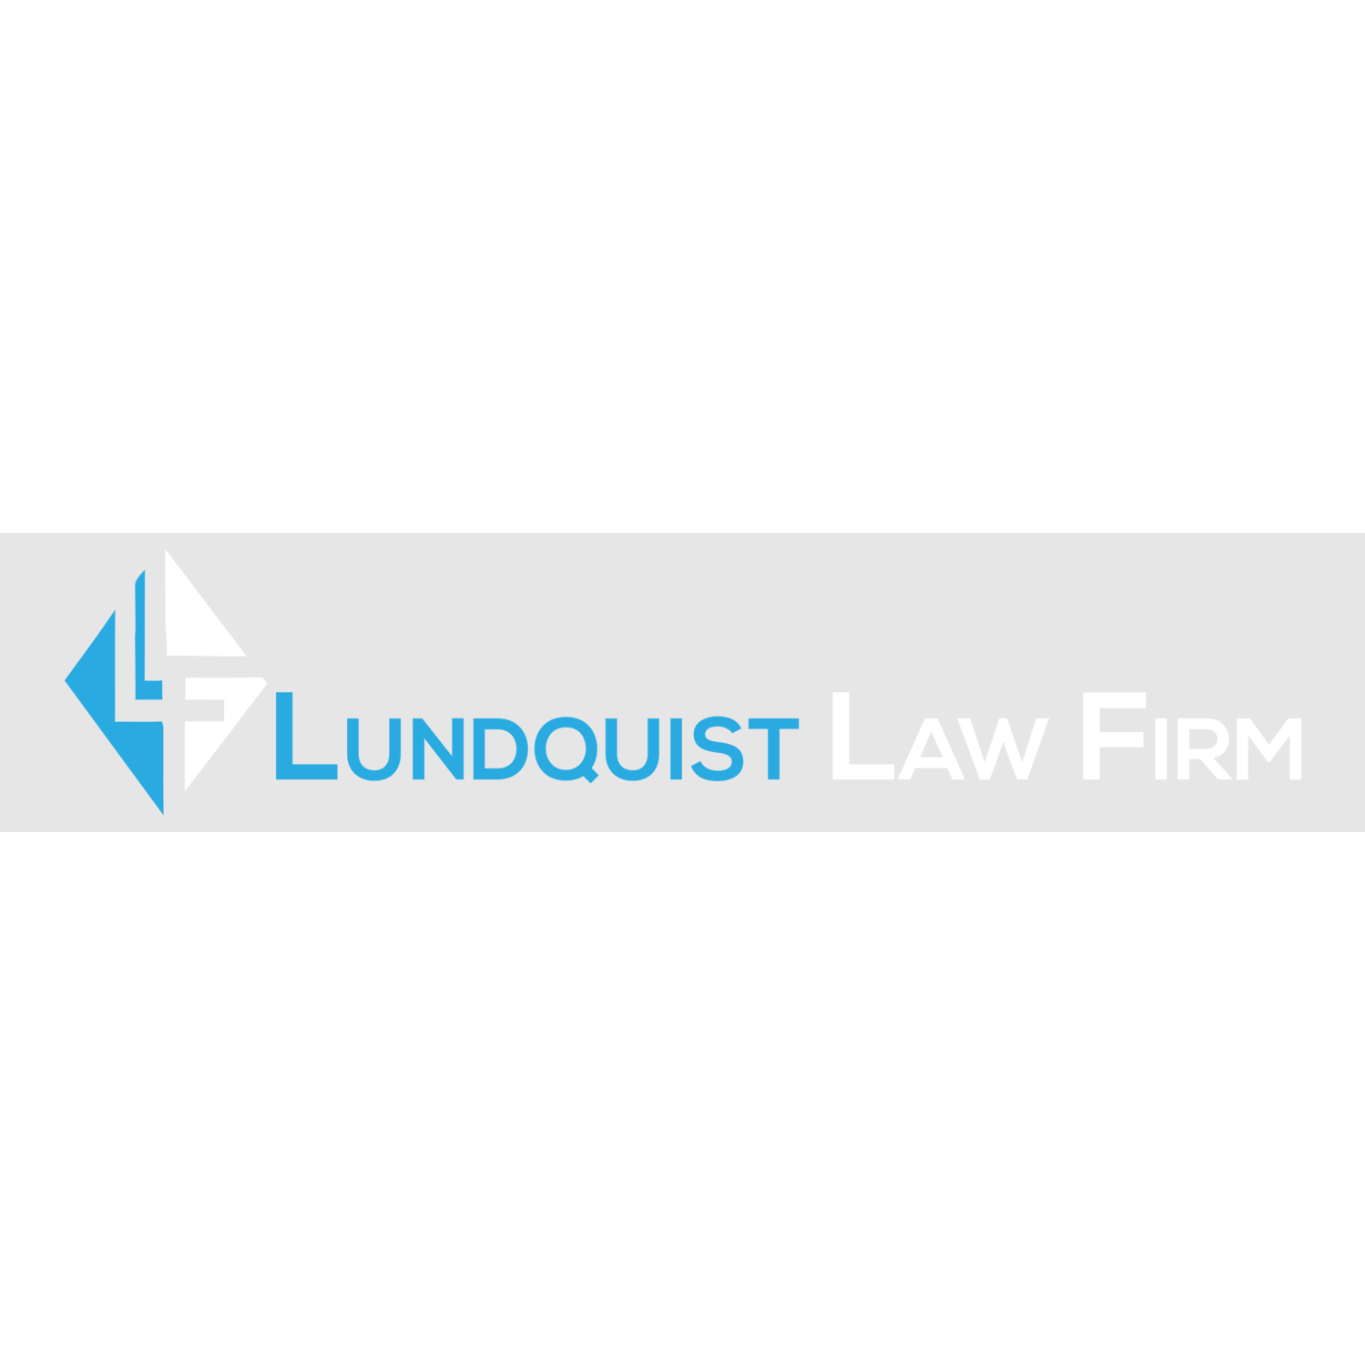 Business logo of Lundquist Law Firm